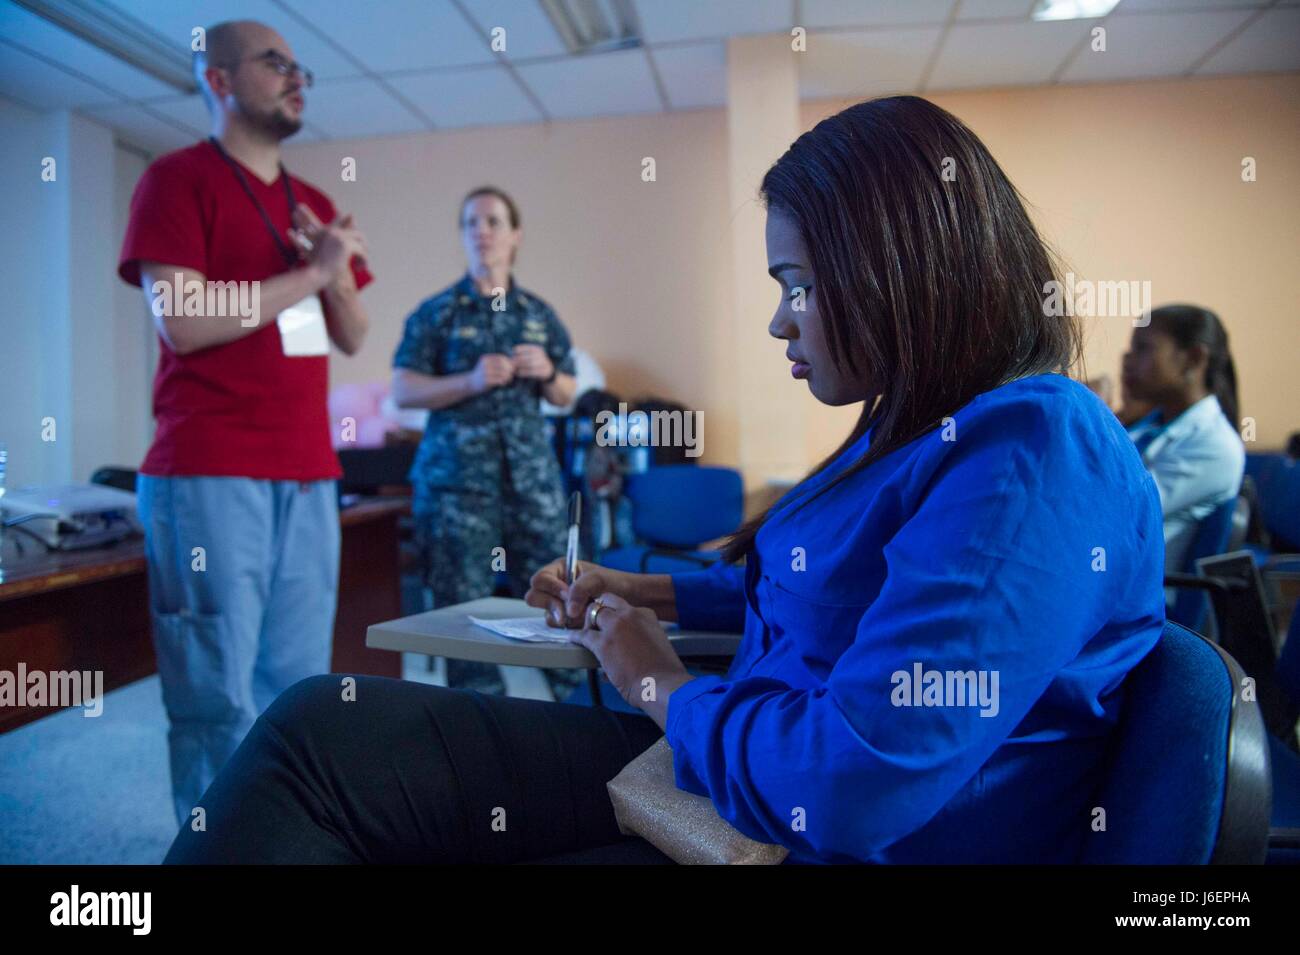 170324-N-YL073-164 RIOHACHA, Colombia (March 24, 2017) - A Colombian health professional takes notes during a discussion on violence against women lead by Lt. Cmdr. Carolyn Ellison, a native of Lenoir, N.C., assigned to Naval Hospital Pensacola, Fla., at a Riohacha hospital during Continuing Promise 2017's (CP-17) visit to Mayapo, Colombia. CP-17 is a U.S. Southern Command-sponsored and U.S. Naval Forces Southern Command/U.S. 4th Fleet-conducted deployment to conduct civil-military operations including humanitarian assistance, training engagements, and medical, dental, and veterinary support i Stock Photo